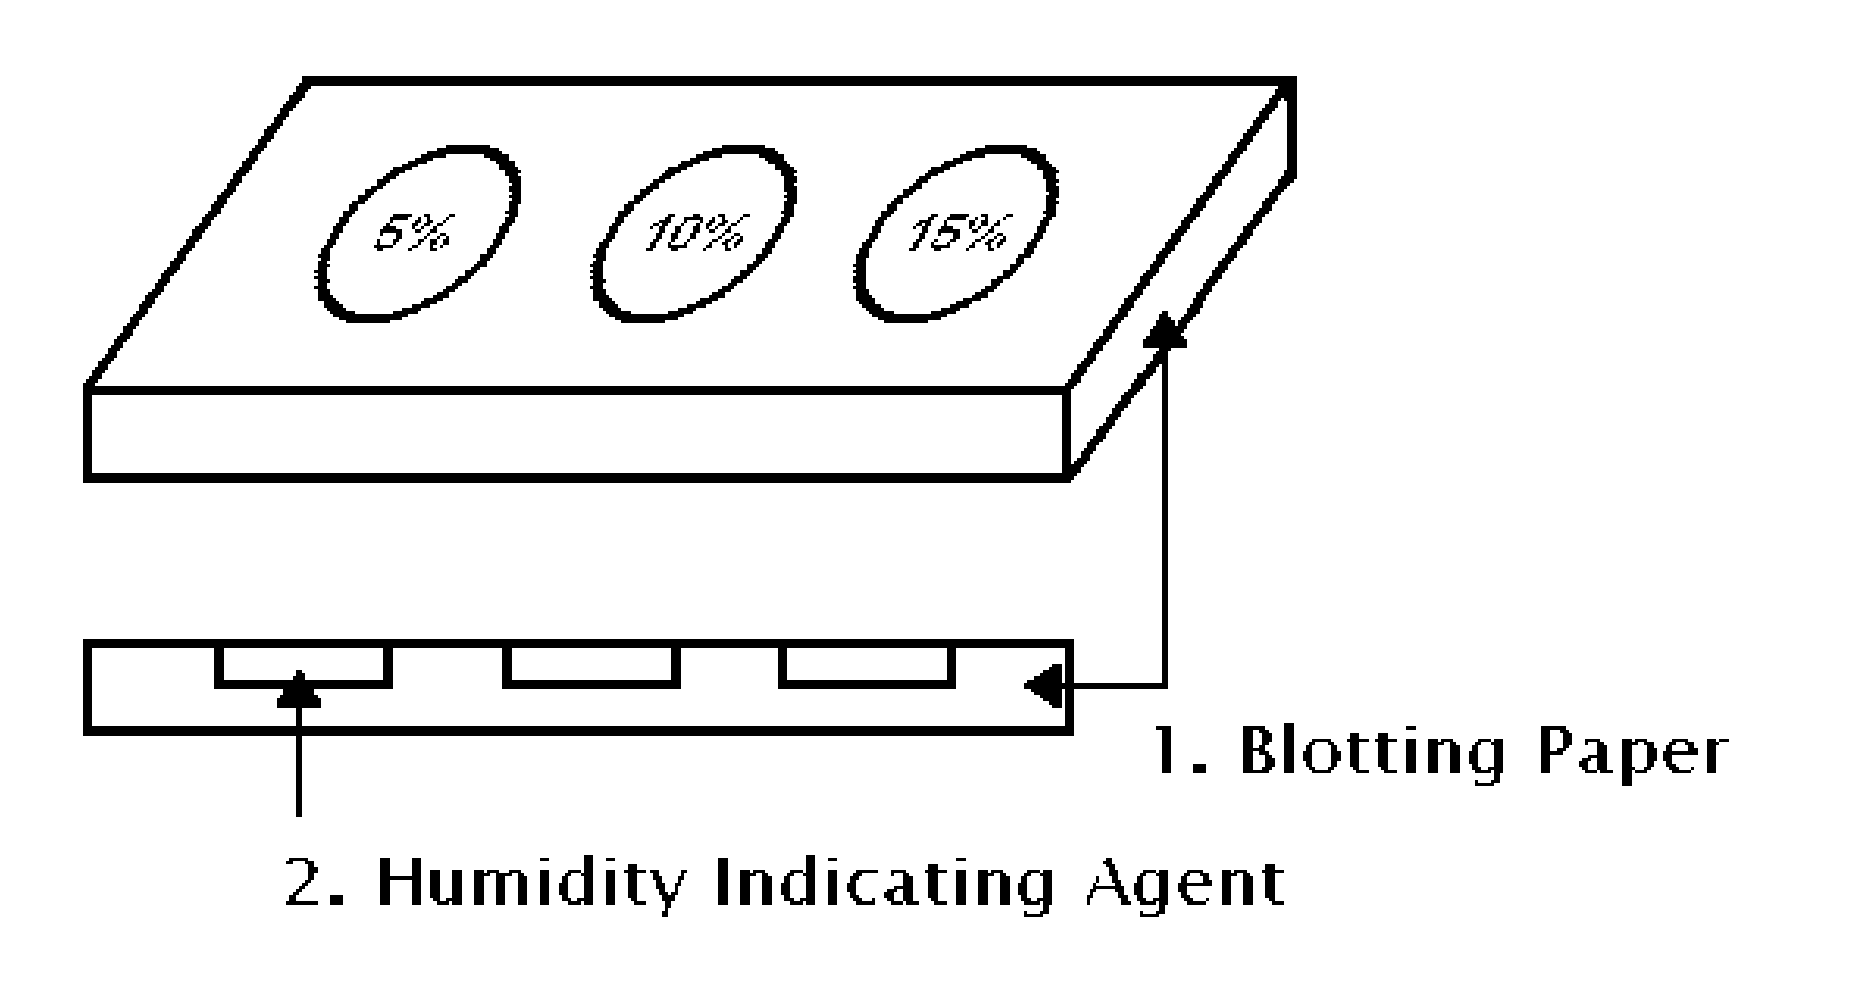 Compositon for non-toxic, non-hazardous, and environmentally friendly humidity-indicating agent and its application